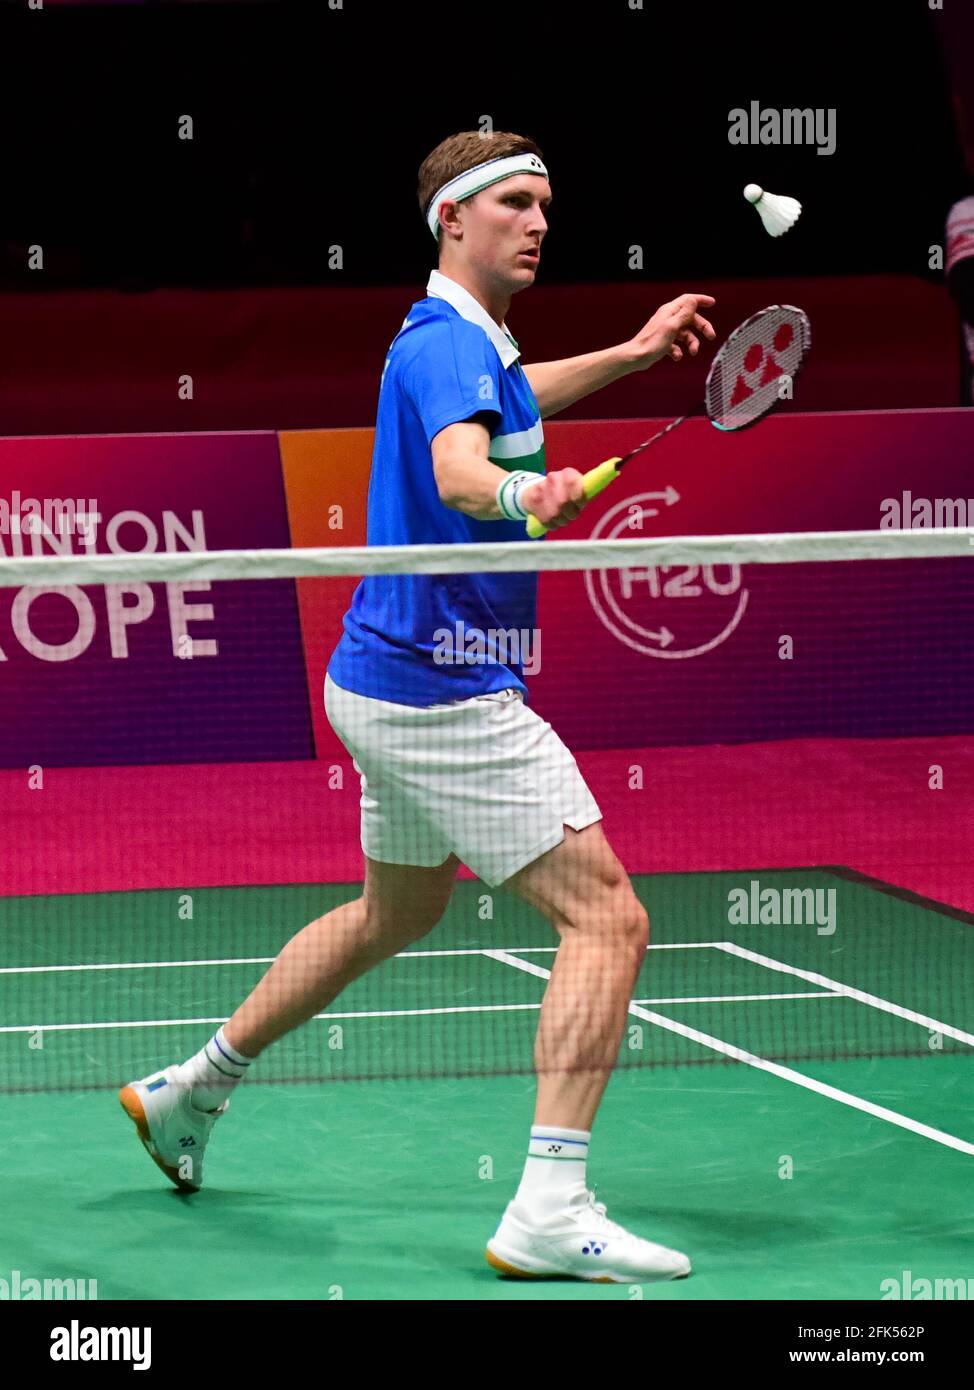 KYIV, UKRAINE - APRIL 28: Viktor Axelsen of Denmark competes in his Mens  Singles match against Milan Ludik of Czech Republic during Day 2 of the  2021 European Badminton Championships at Palace